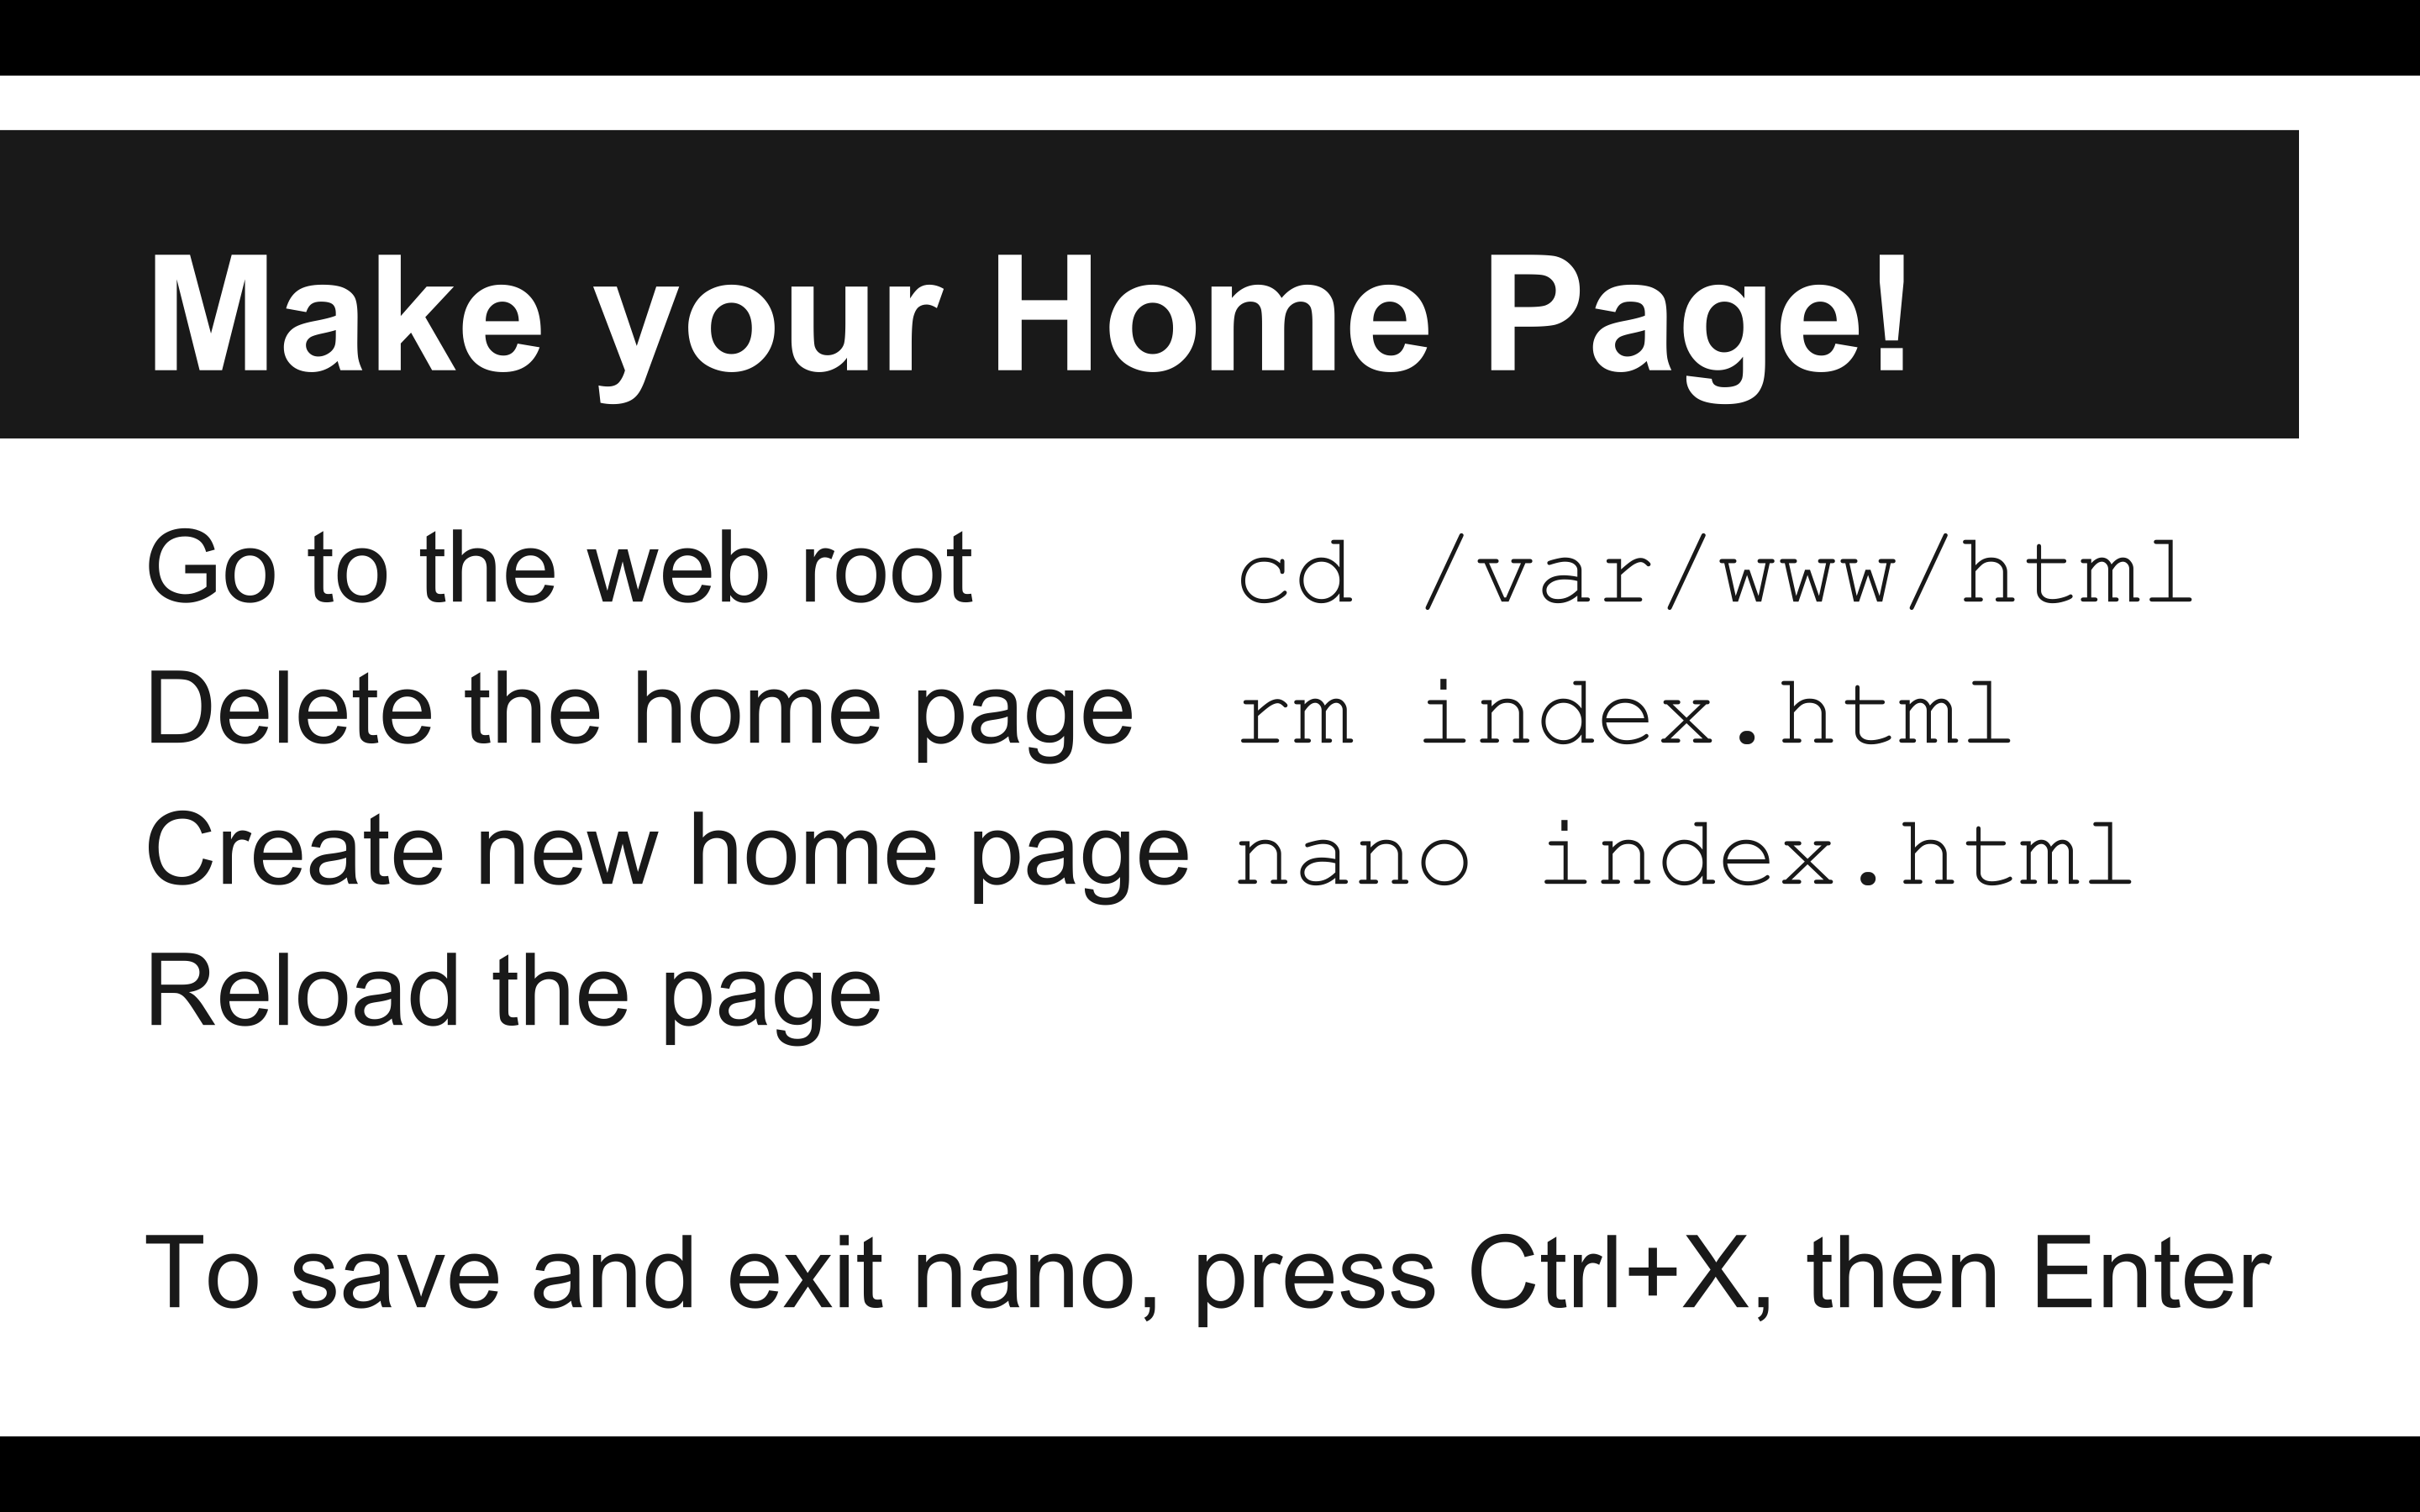 Using nano to replace the default page with a new one